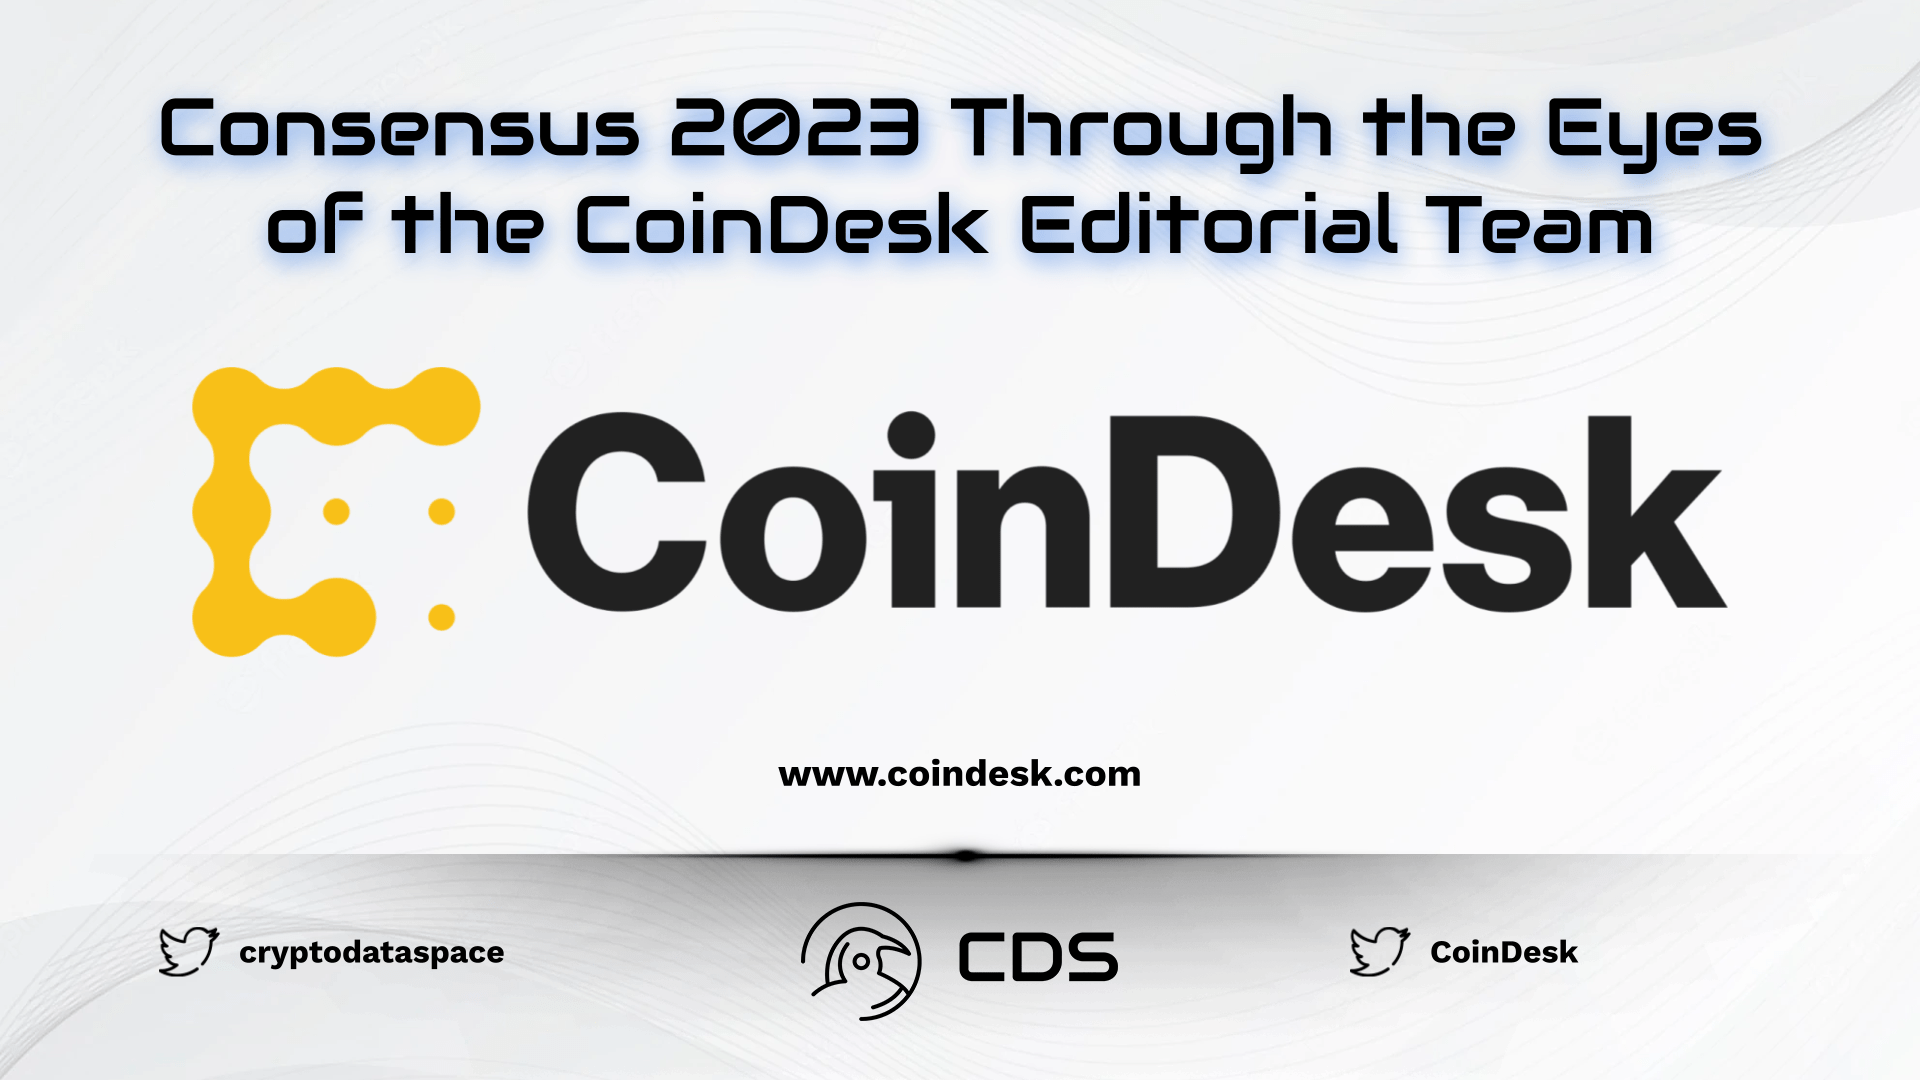 Consensus 2023 Through the Eyes of the CoinDesk Editorial Team